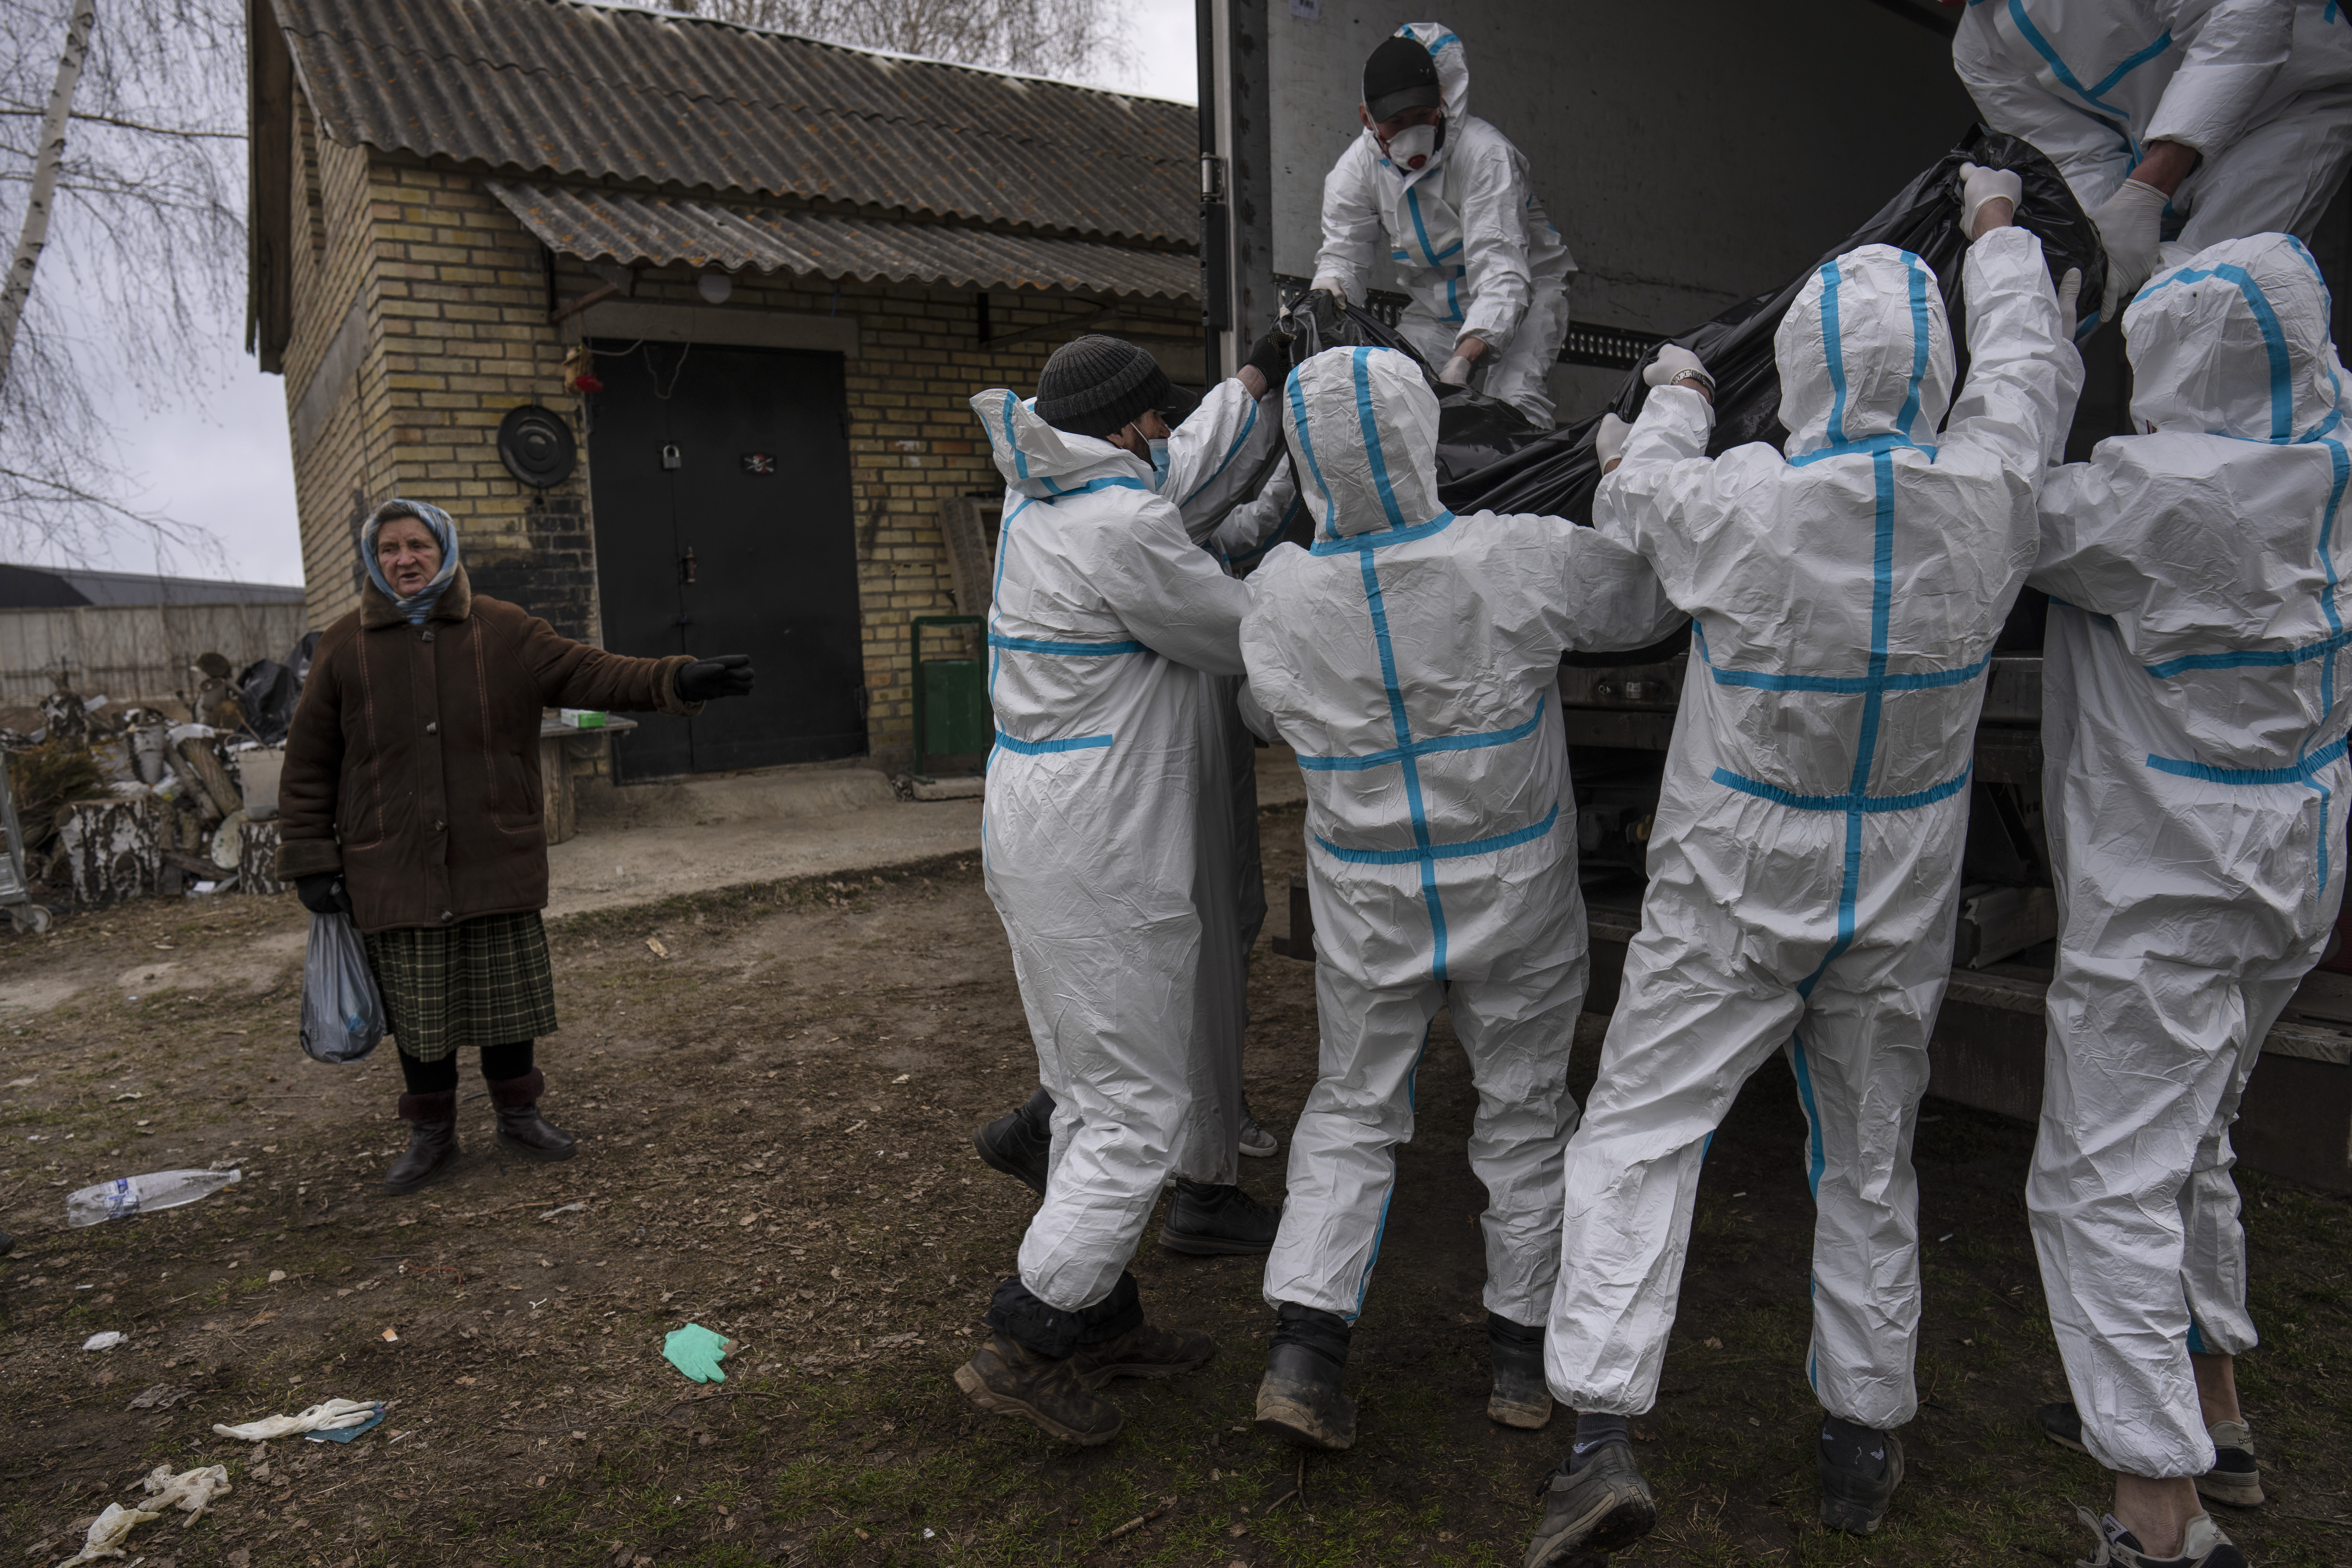 Nadiya Trubchaninova, 70, observes volunteers as they load a body bag containing a civilian killed by Russian soldiers into a truck, in Bucha, on the outskirts of Kyiv, Ukraine, on April 12. 